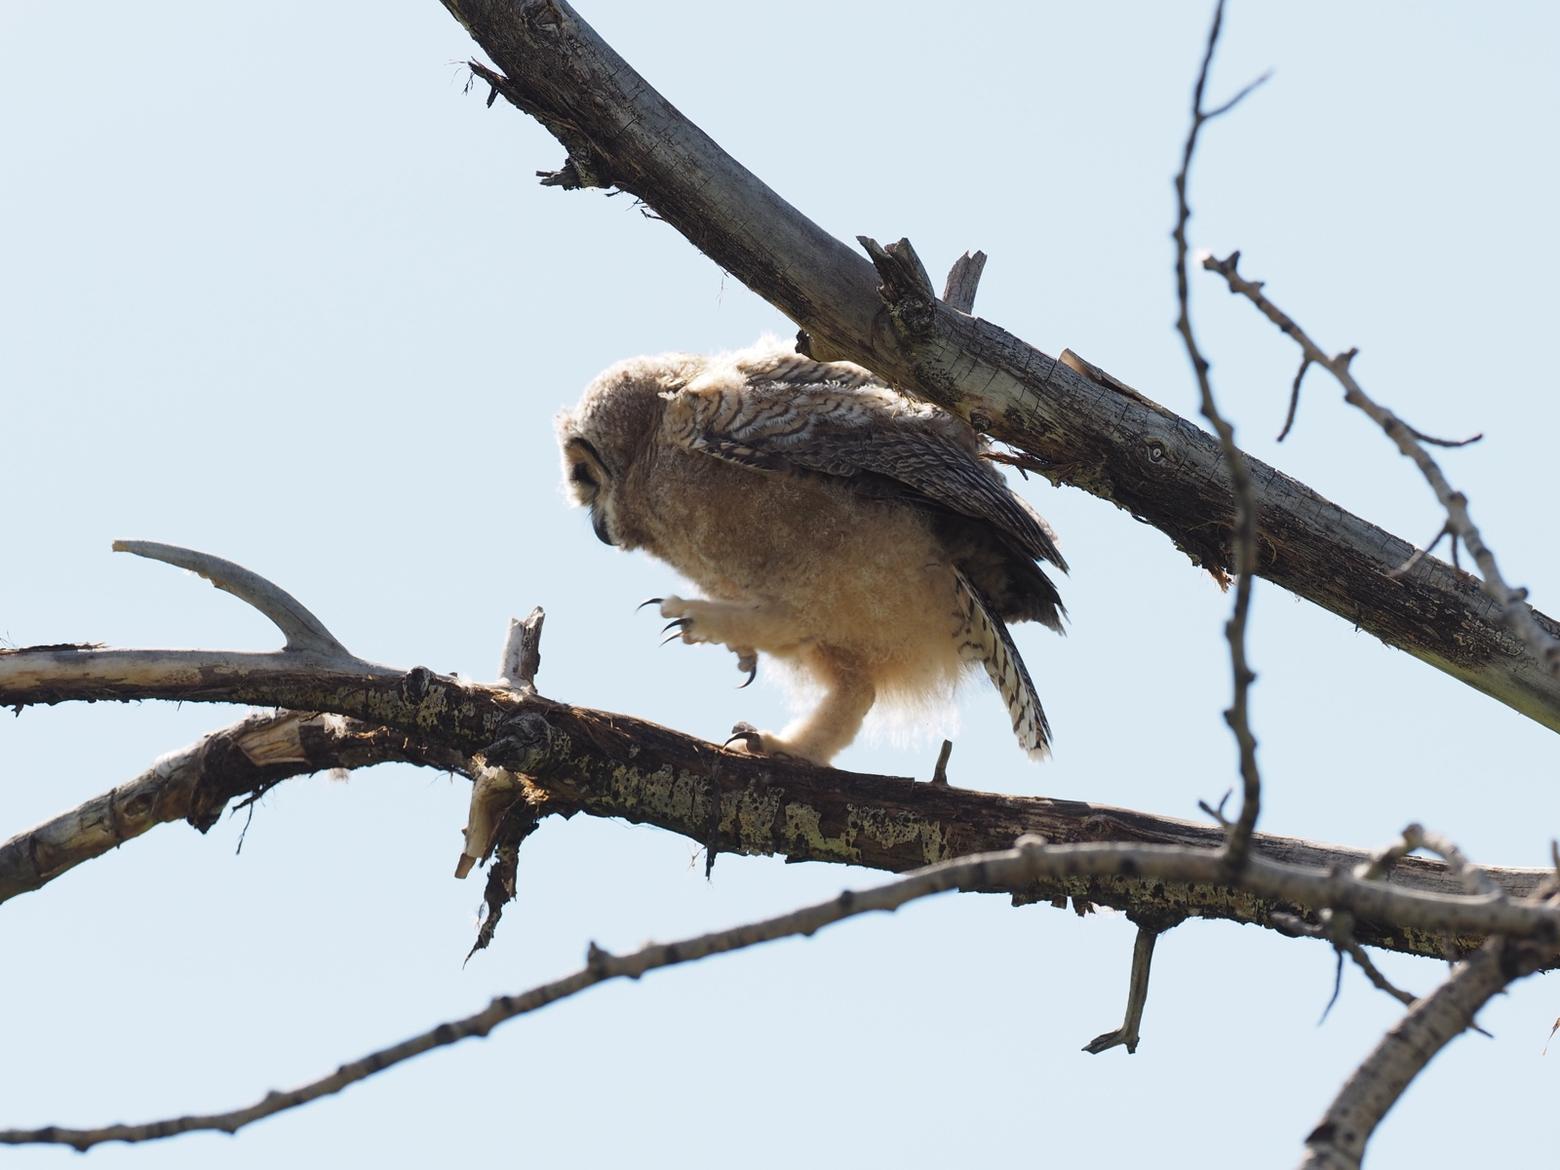 Out on a limb: A young Great Horned owl surveys the world below while preparing to fledge. Photo by Tim Crawford